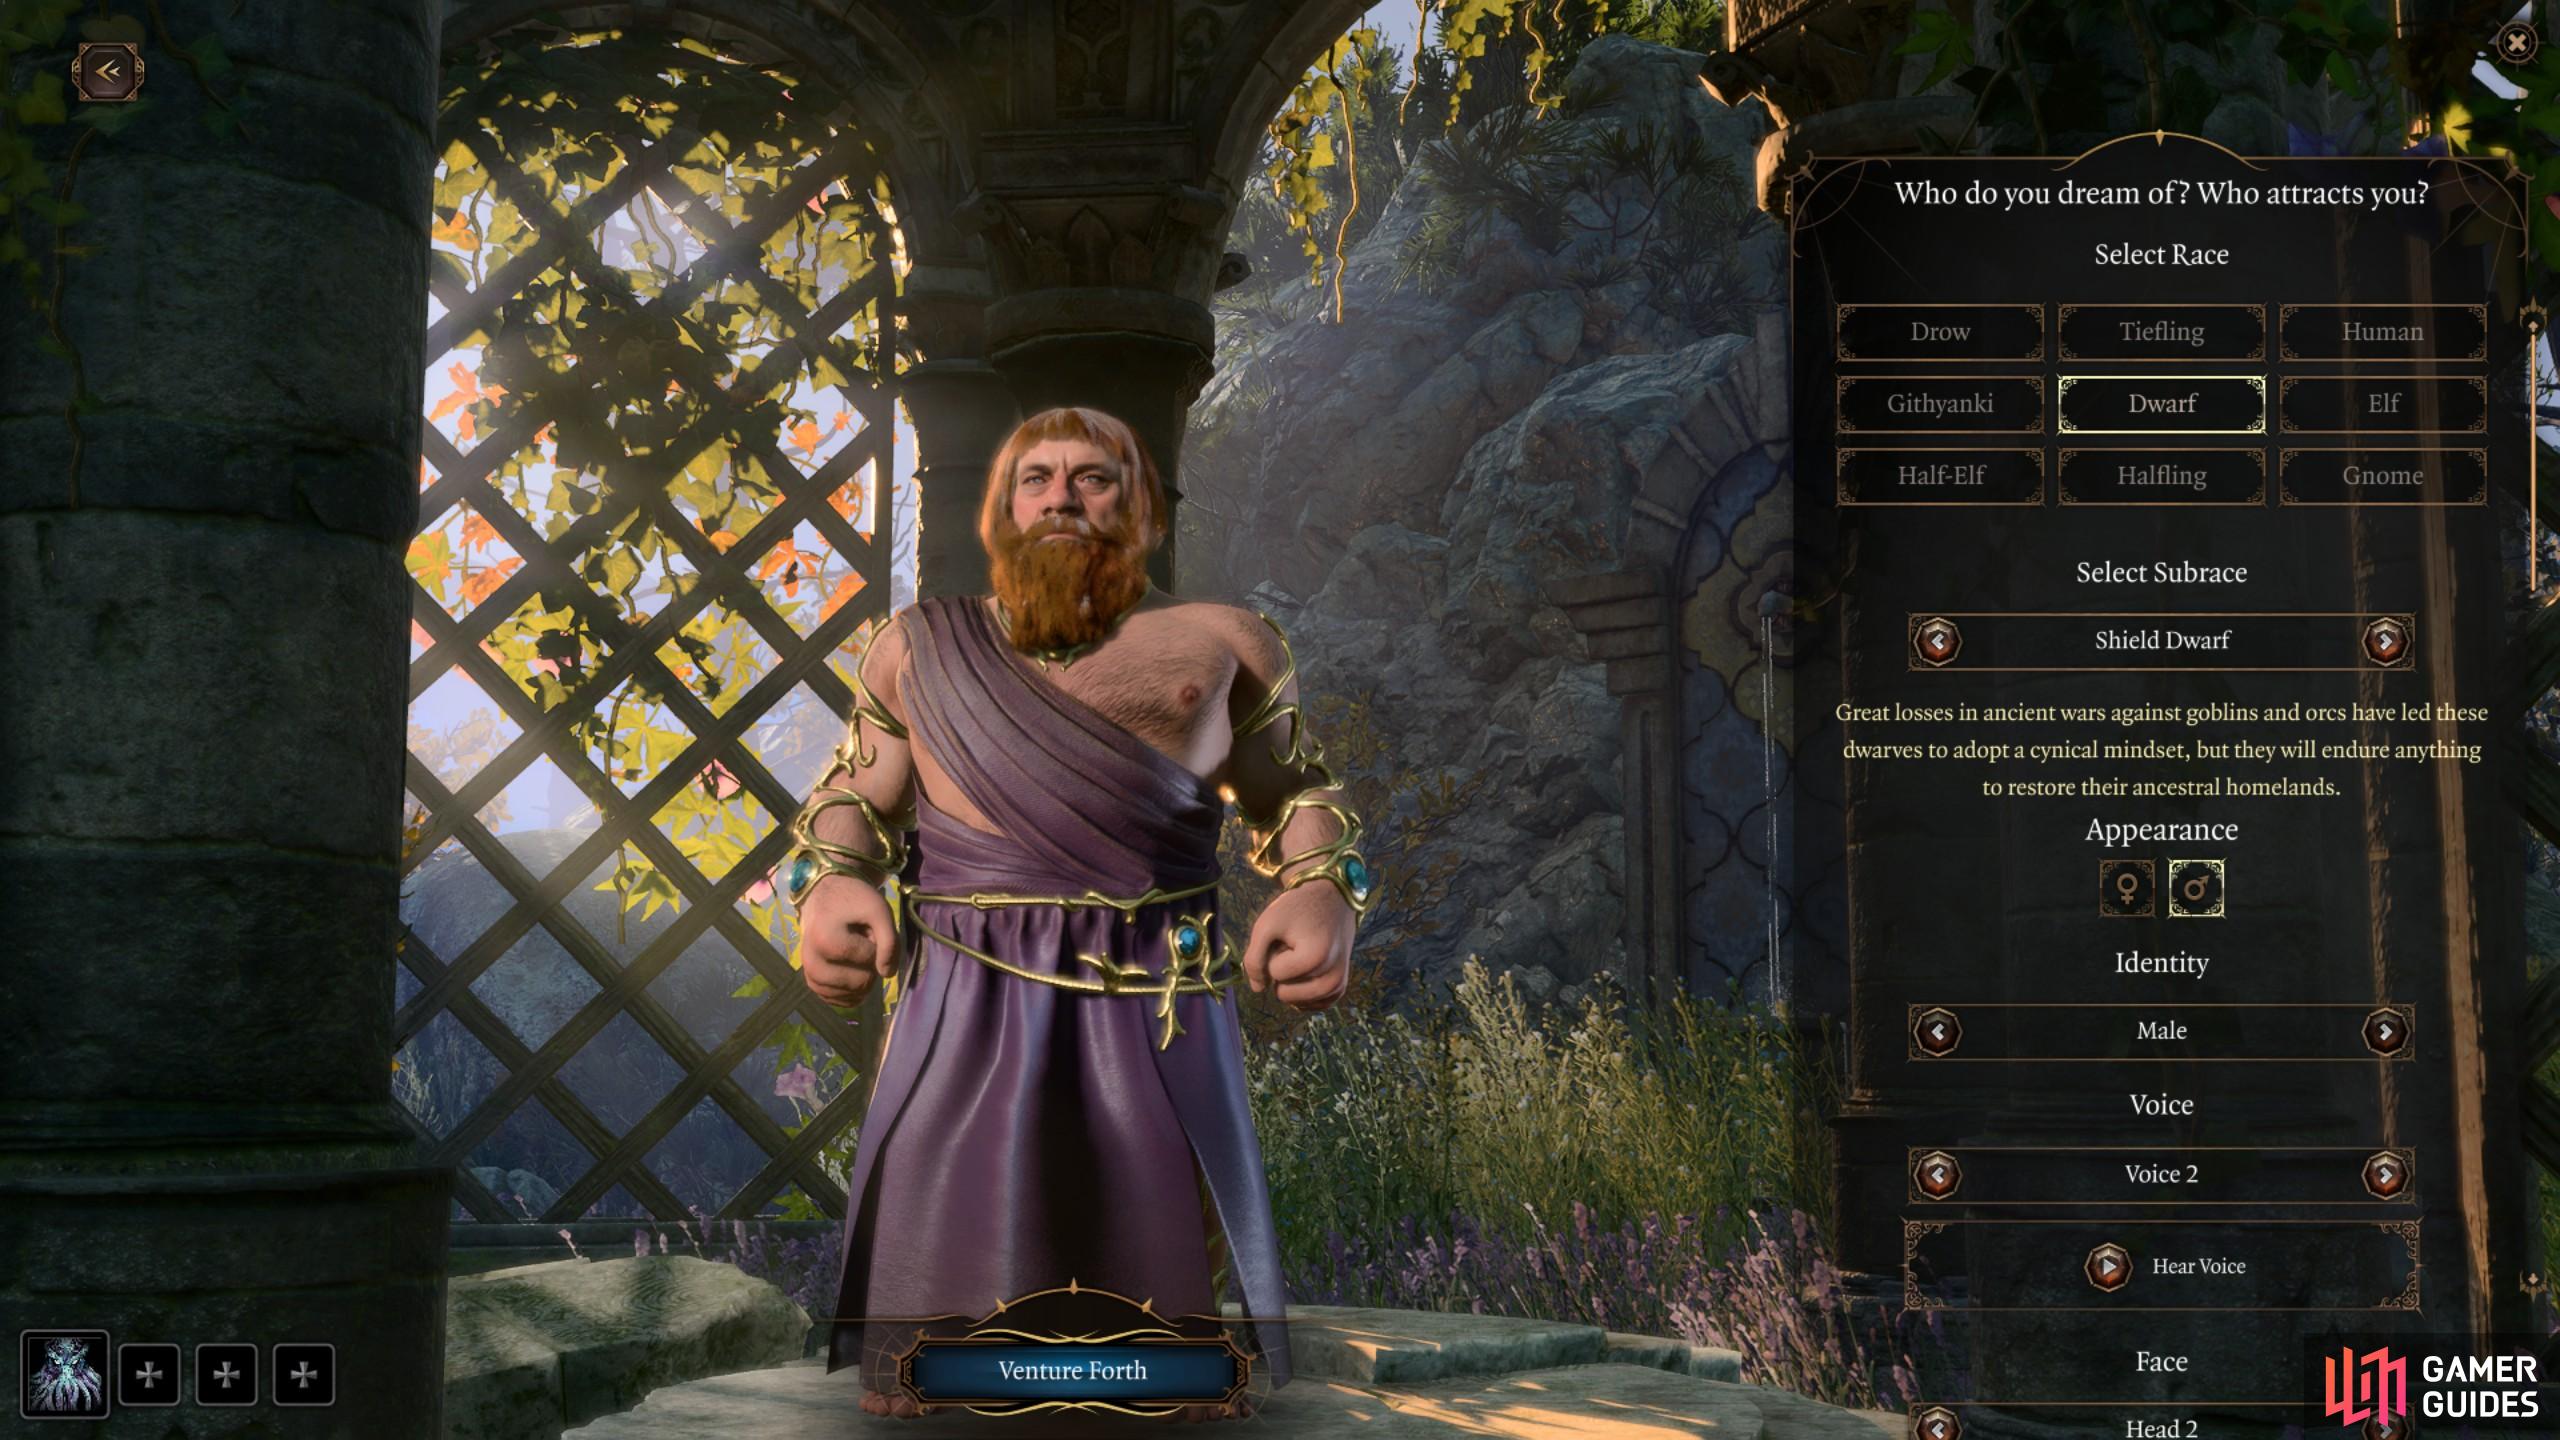 Nothing screams an attractive campaign-related character more than a dwarf who wants to take you to the pub.